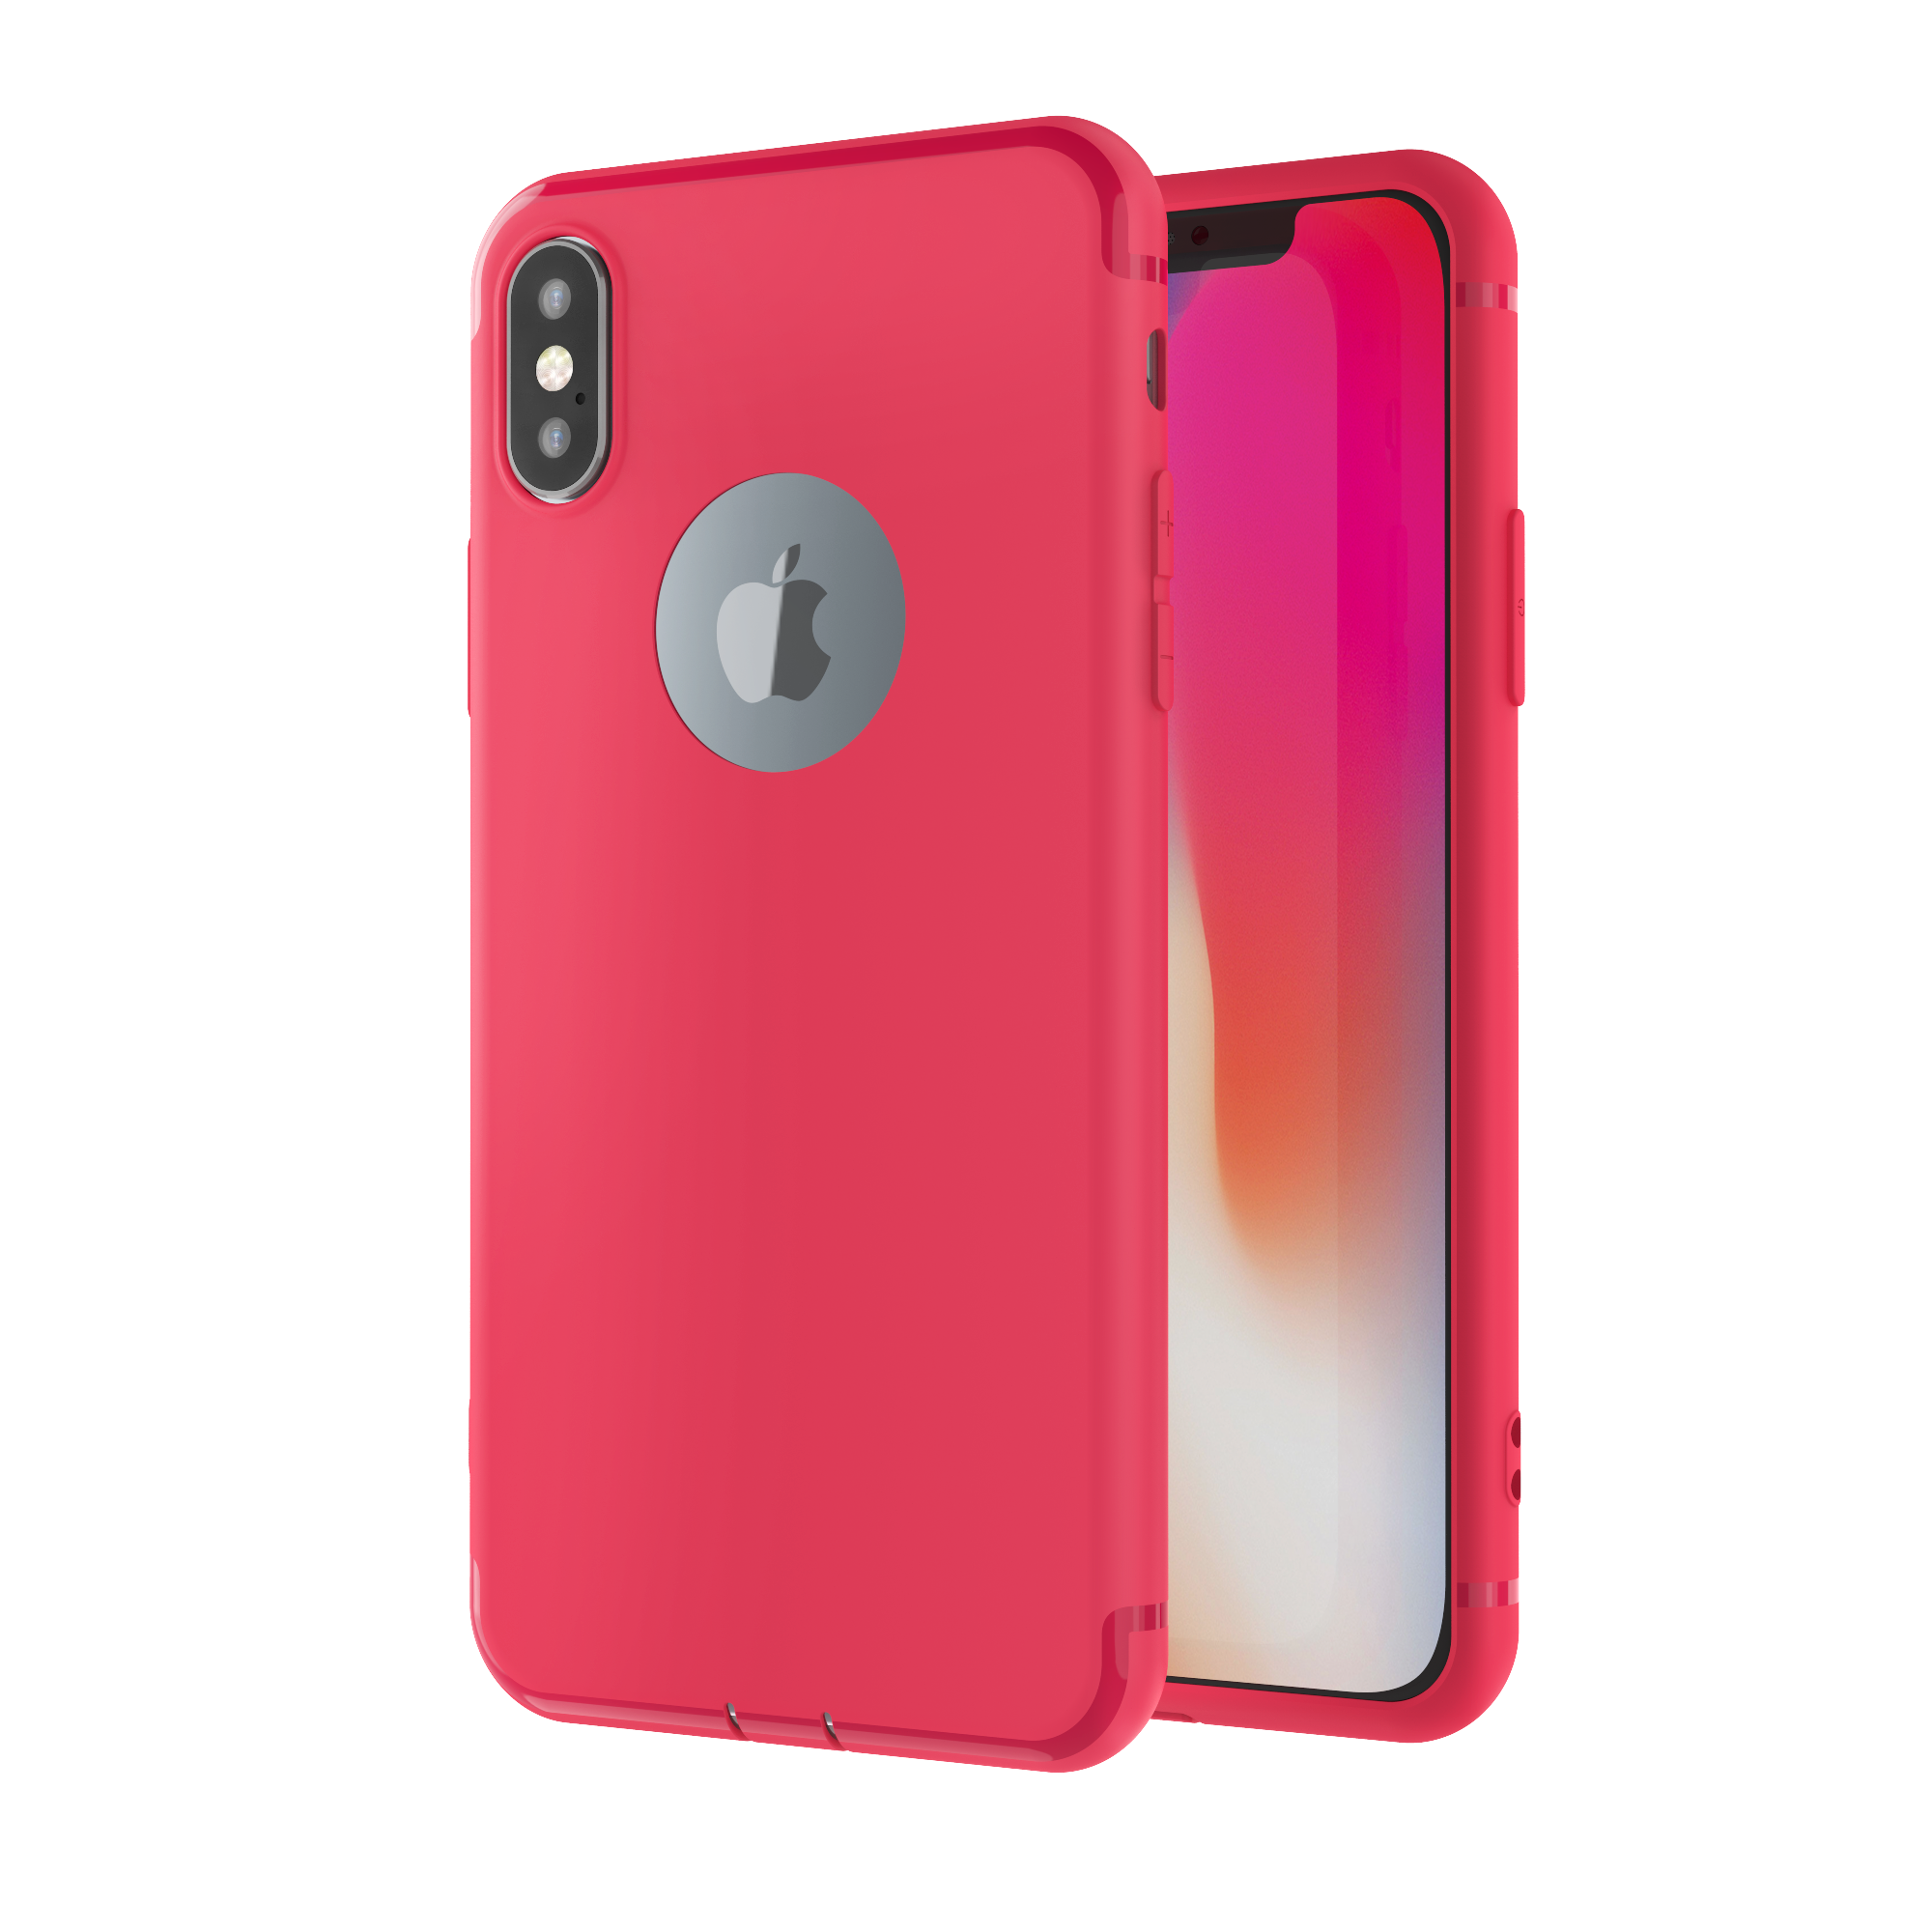 New Shockproof Slim Silicone Thin Case Soft Tpu Cover For Apple Iphone Xs Xr Max Ebay